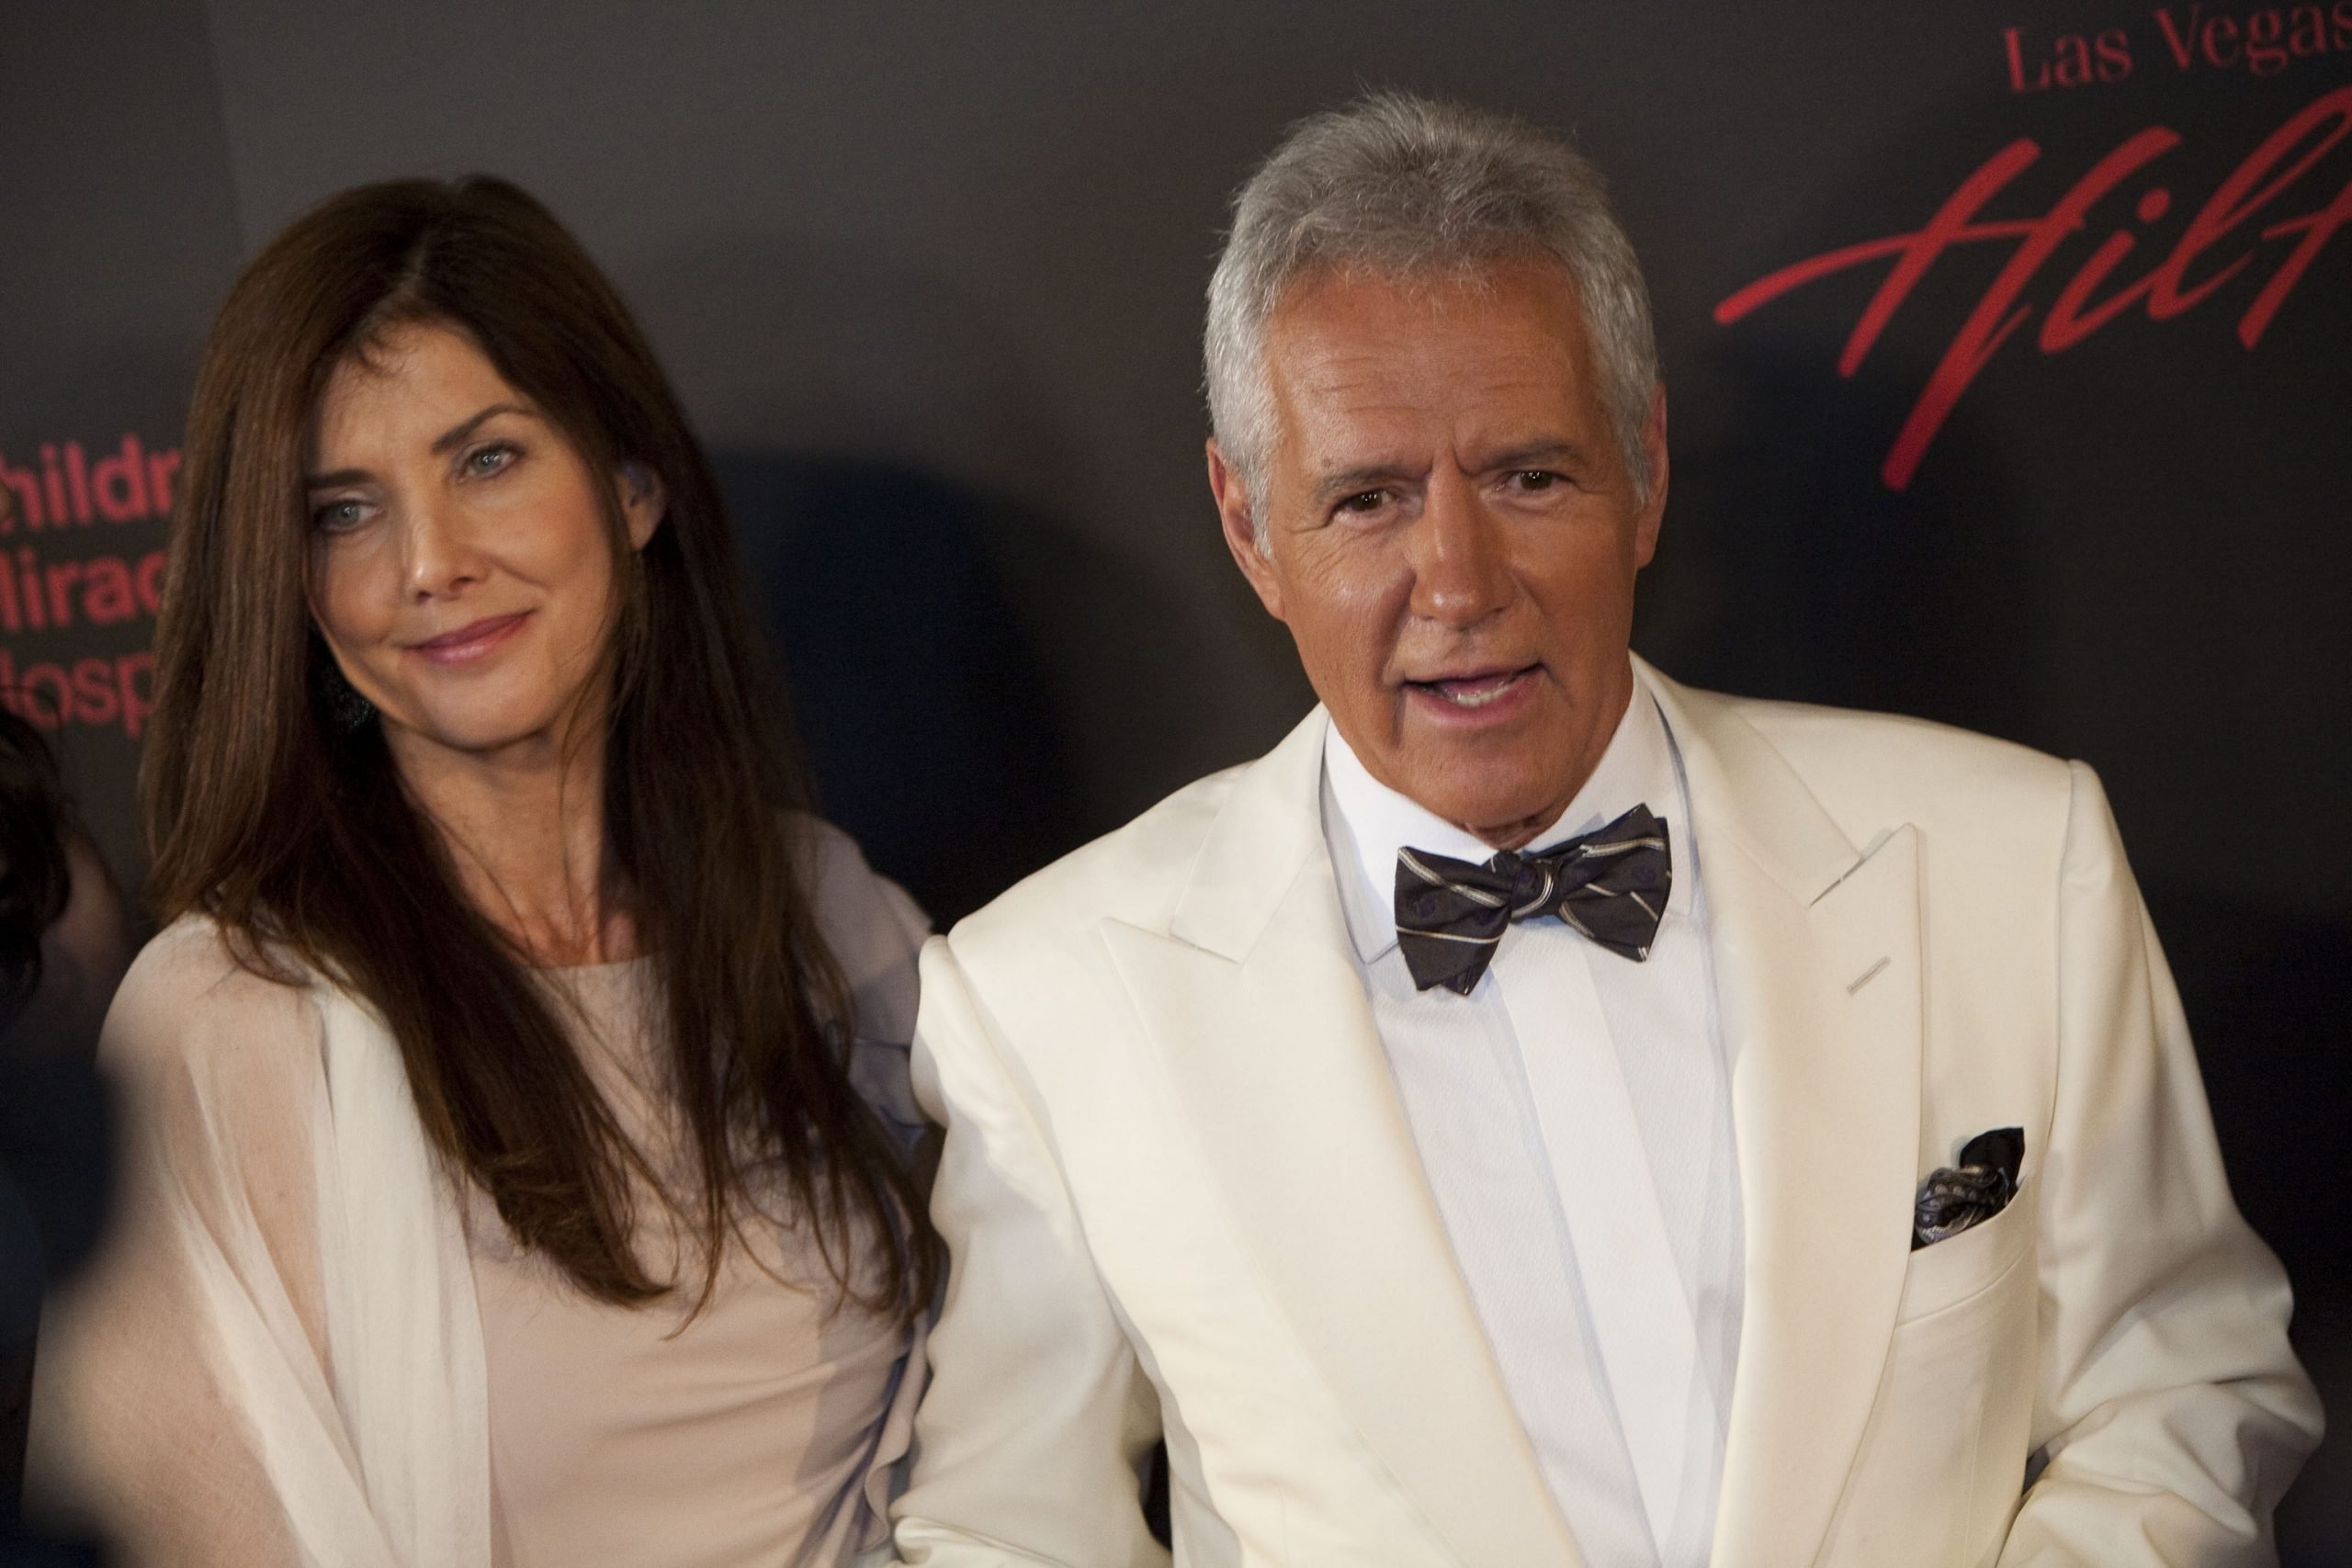 Late 'Jeopardy!' host Alex Trebek, right, with his wife Jean in 2011.